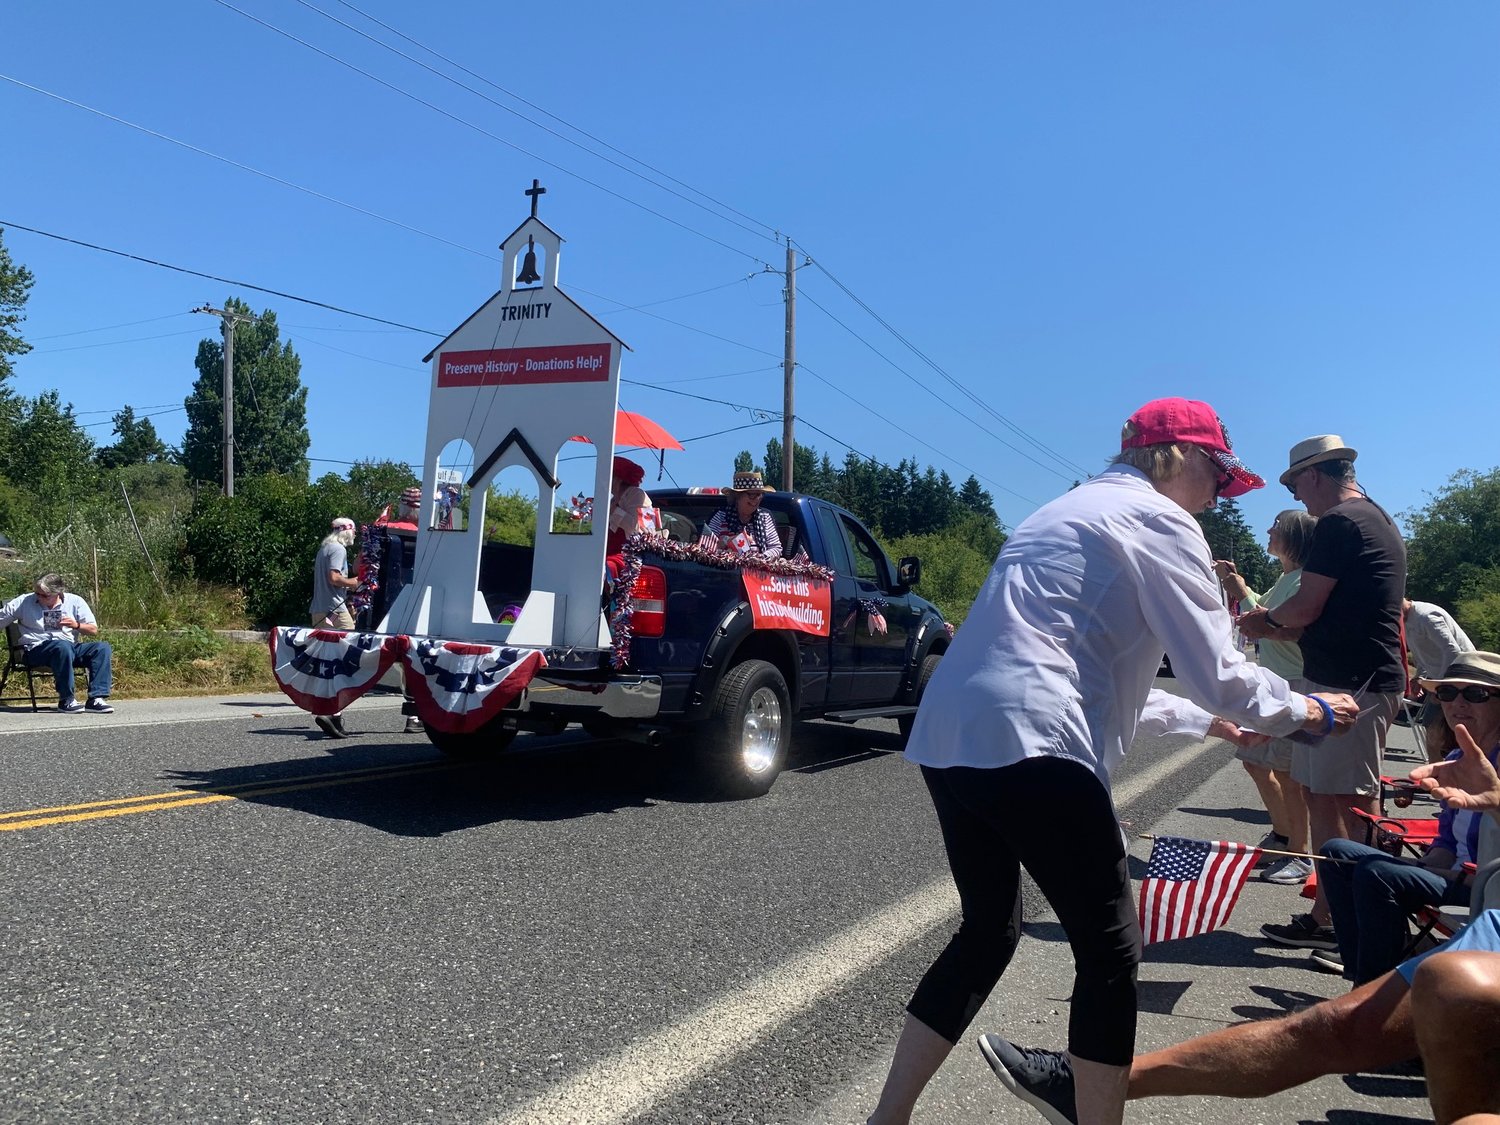 The Fourth of July parade started from the Breakers parking lot along Gulf Road and ran down Tyee Drive to the marina overflow parking lot on Sunday.